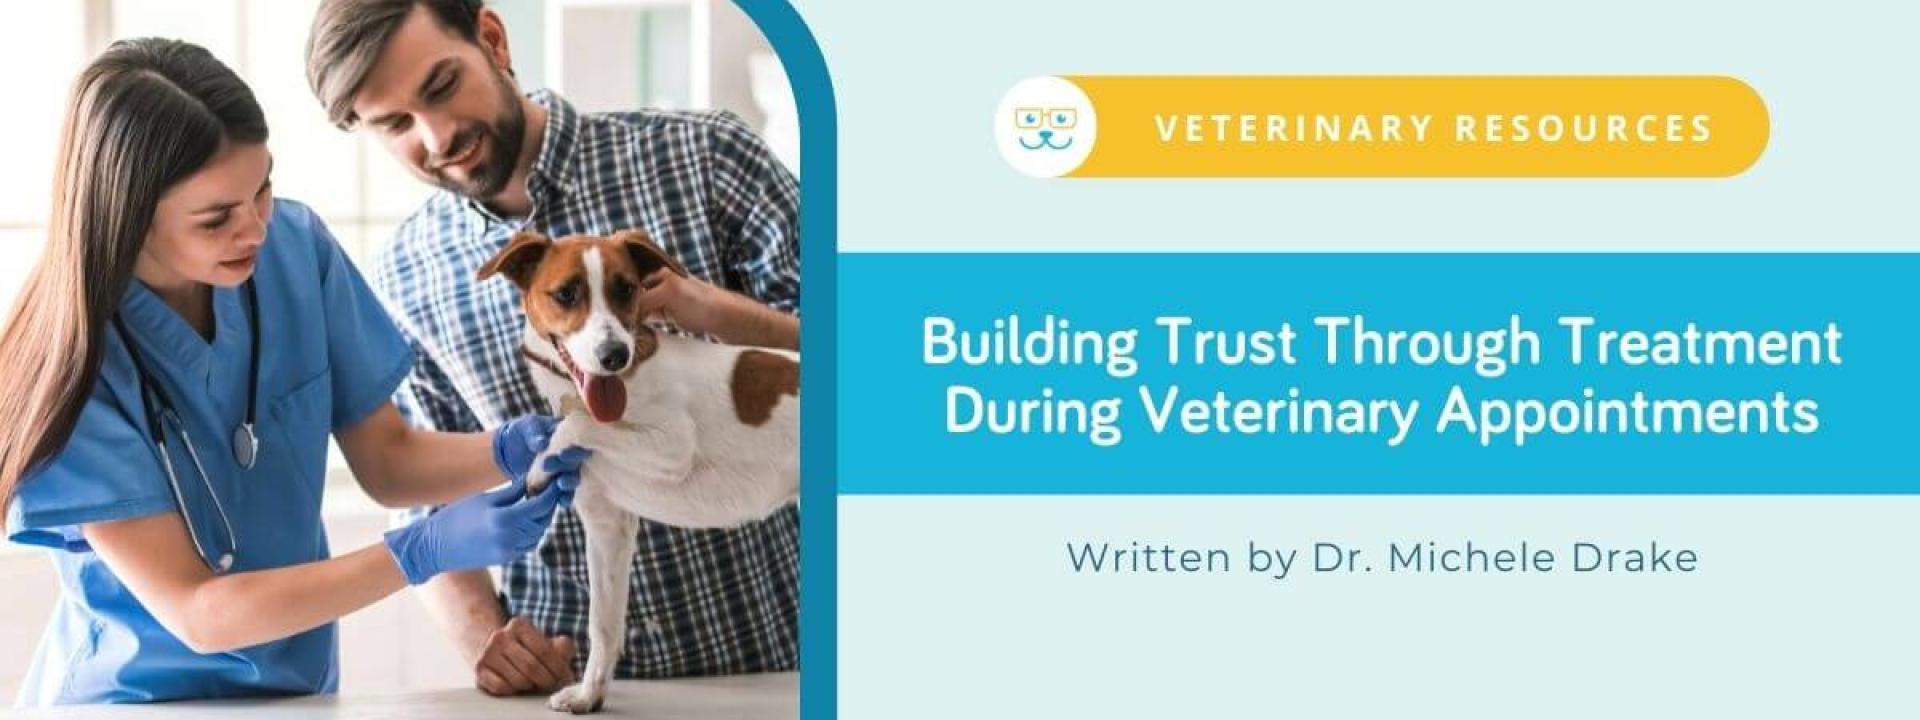 Building Trust Through Treatment During Veterinary Appointments